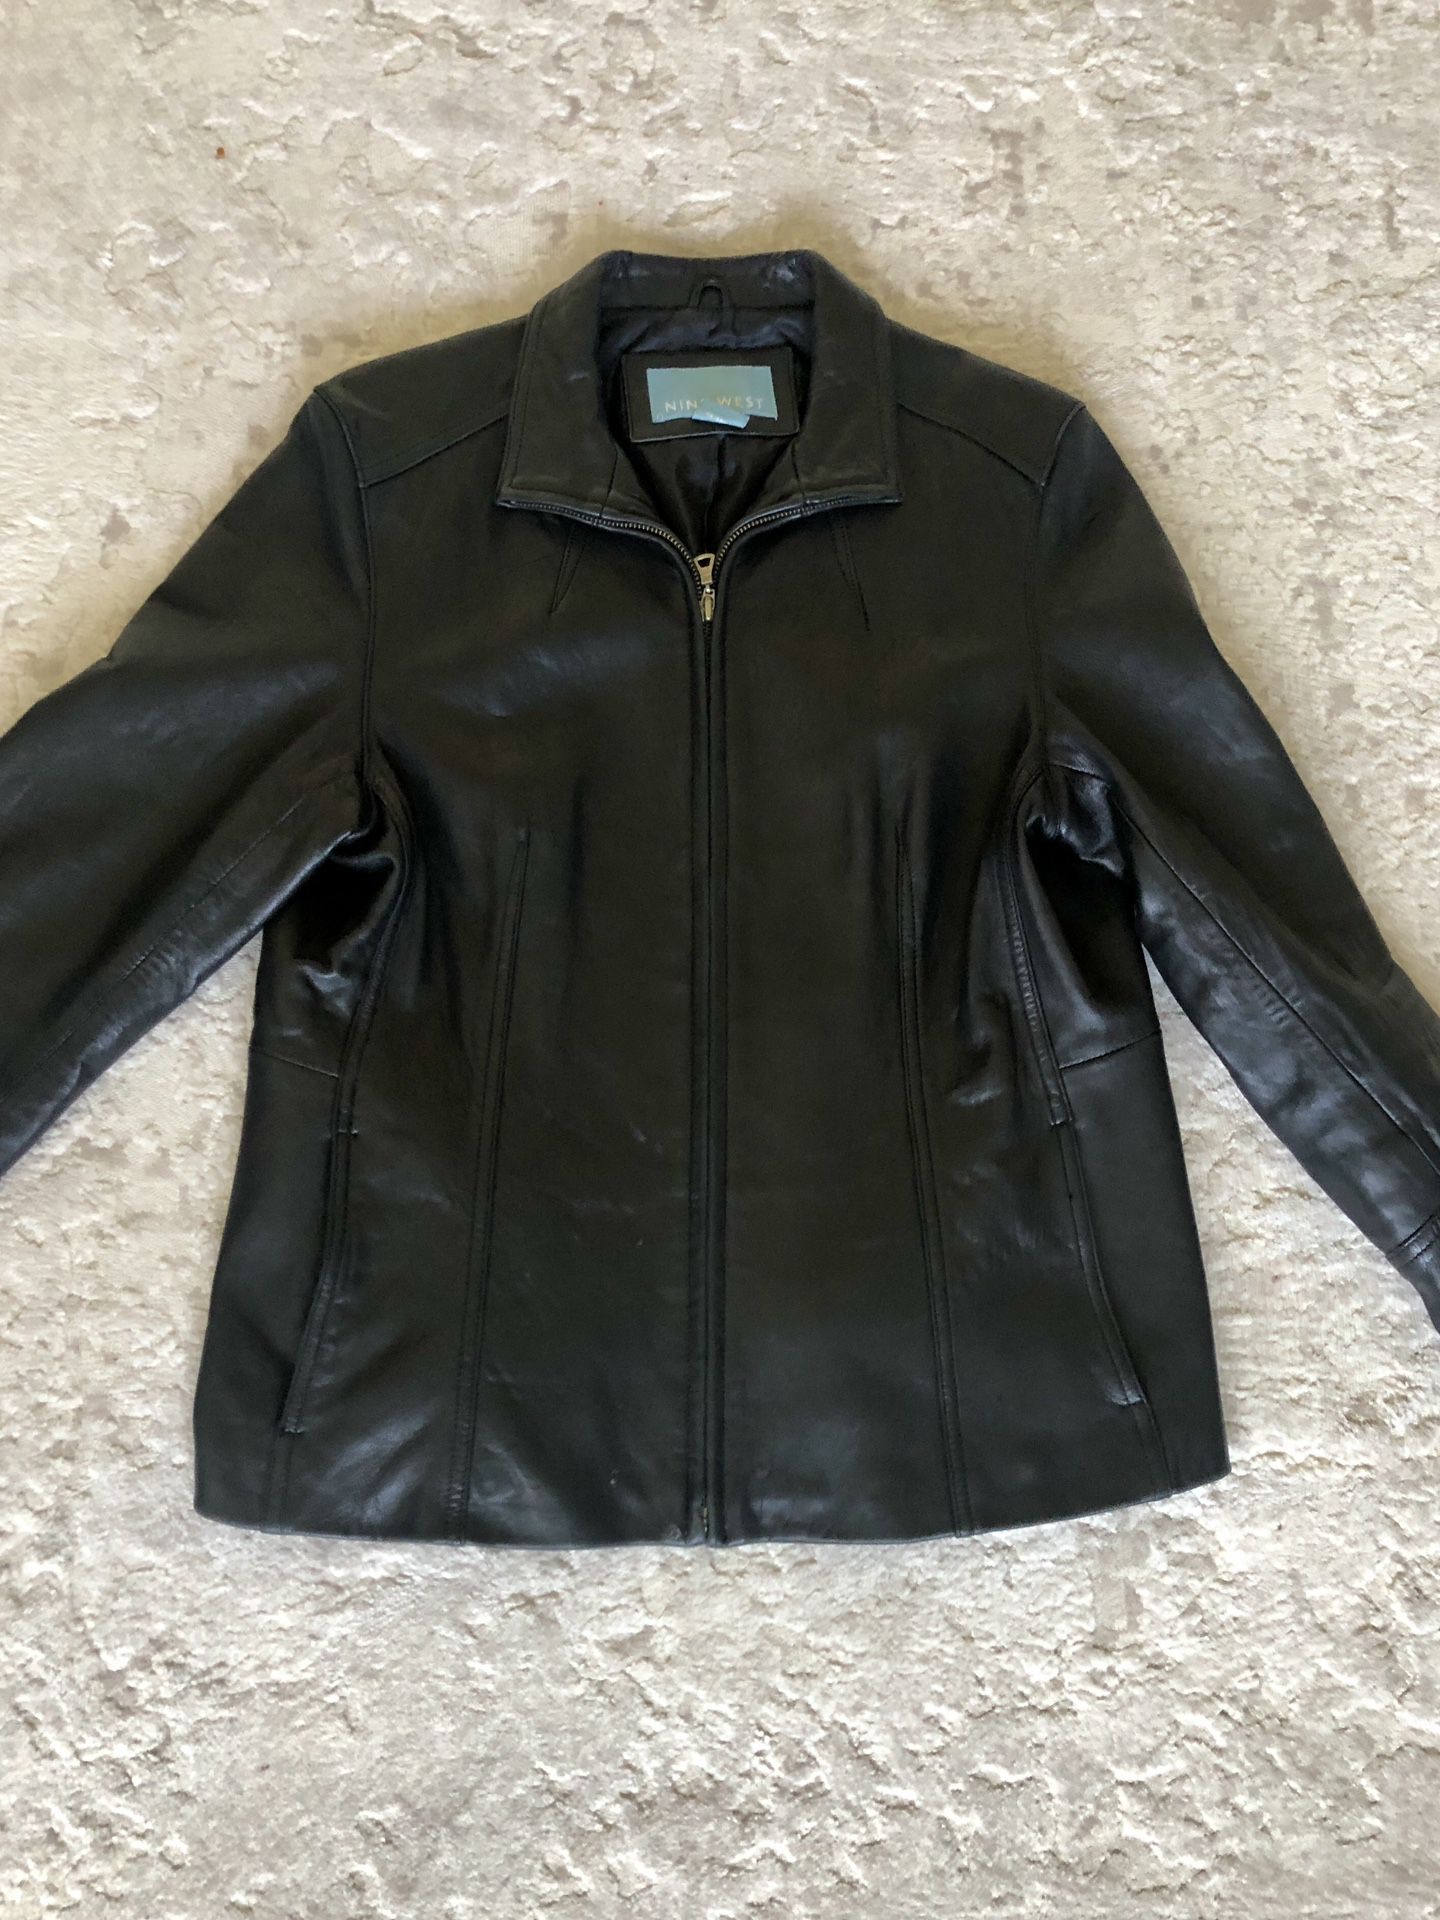 Leather Jacket Great Condition $25